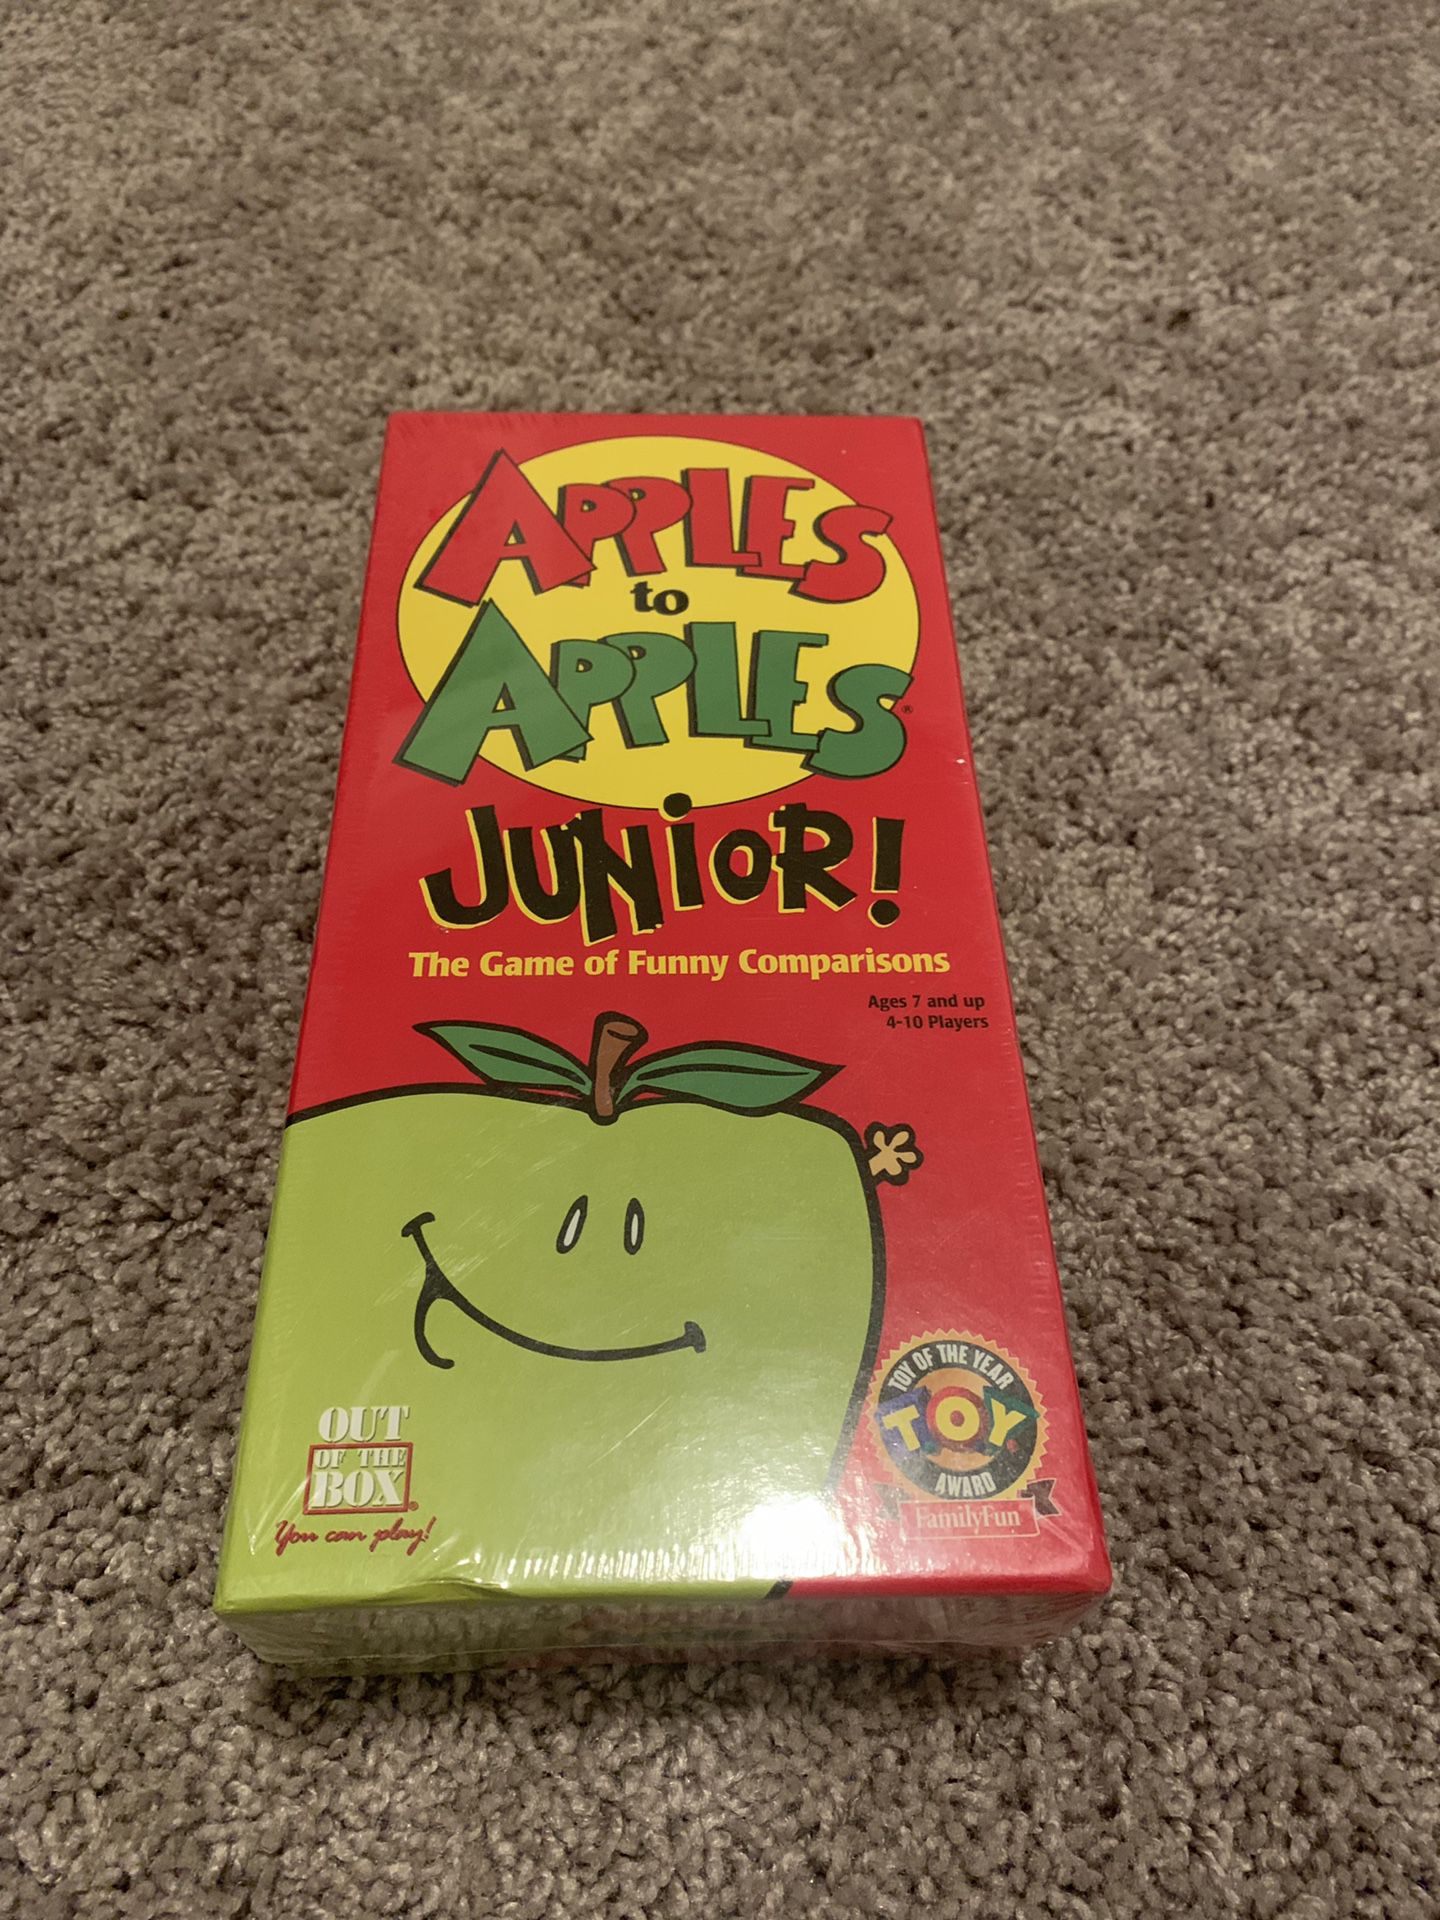 Apples to apples junior!